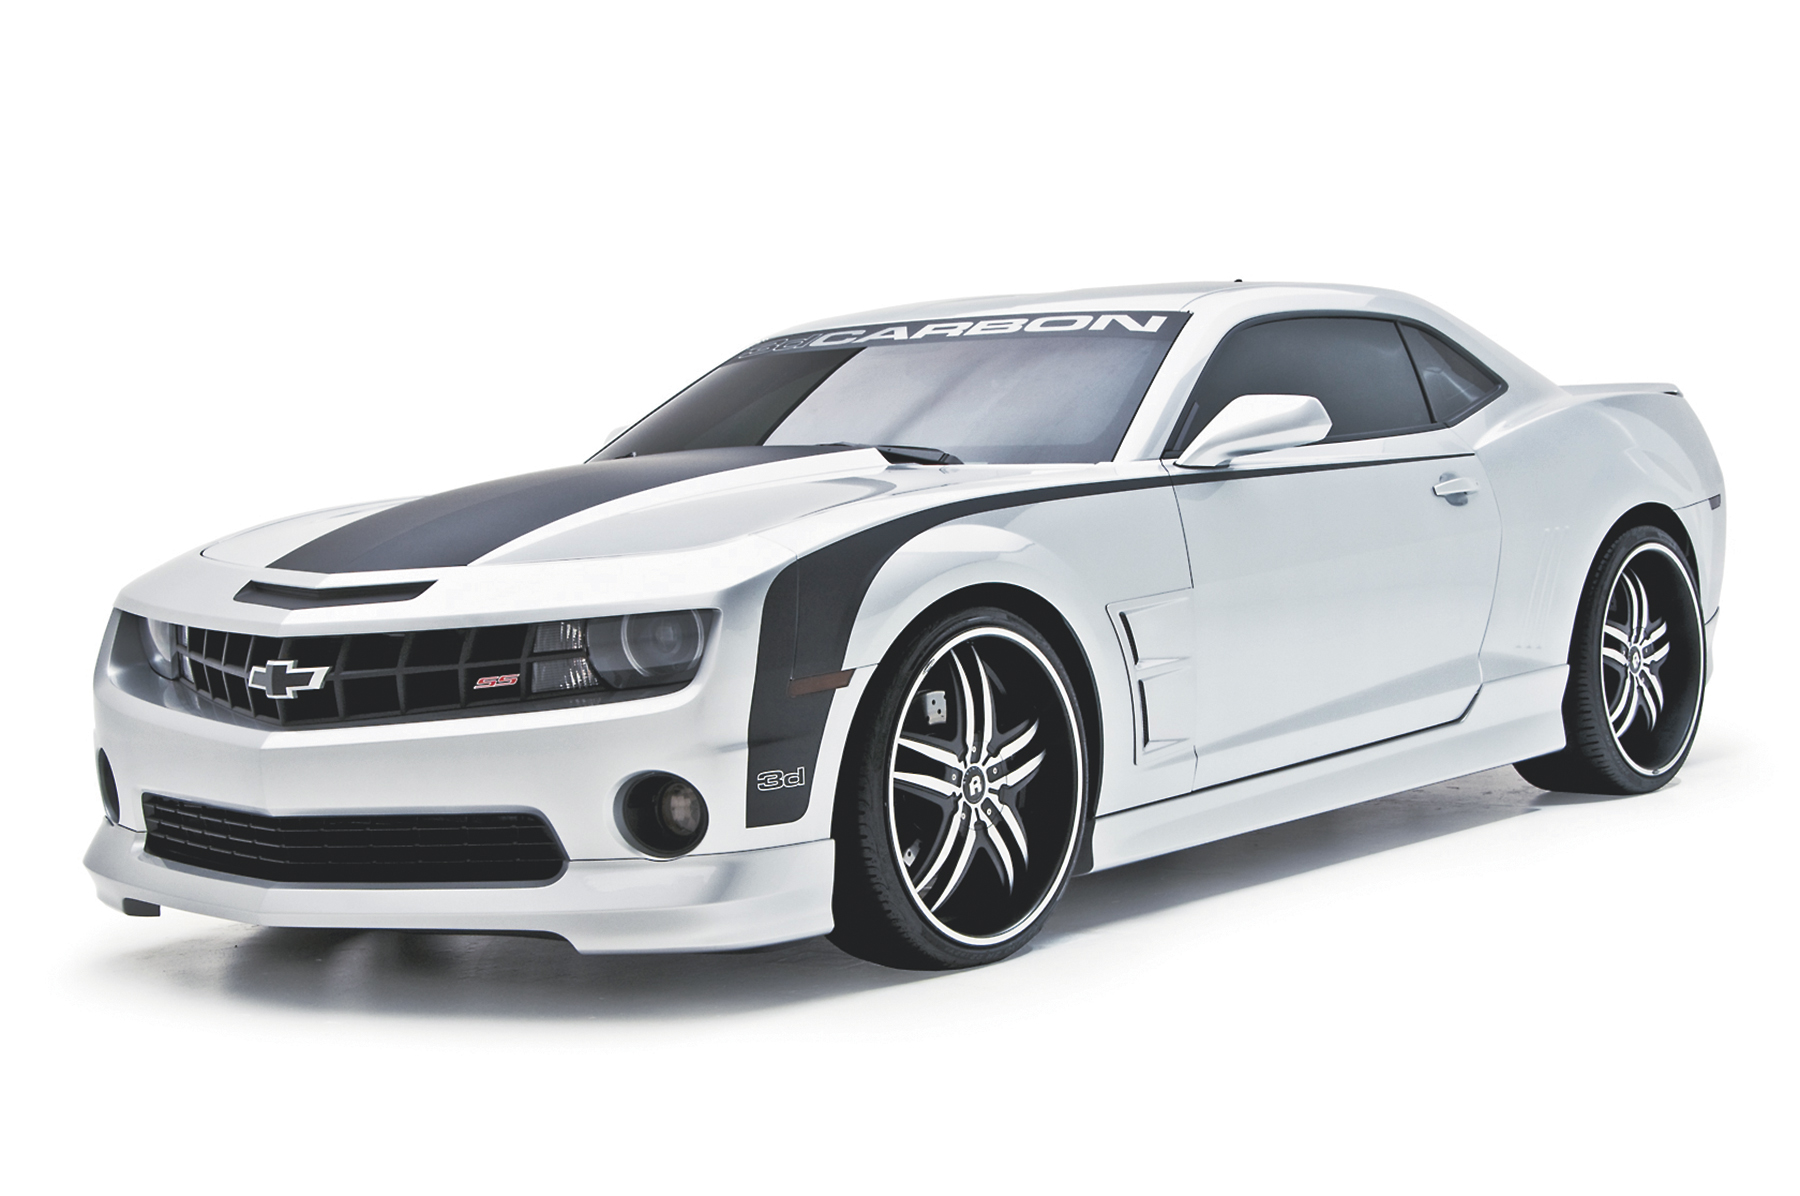 3dCarbon Body Styling Kit for 2010-13 Camaro.